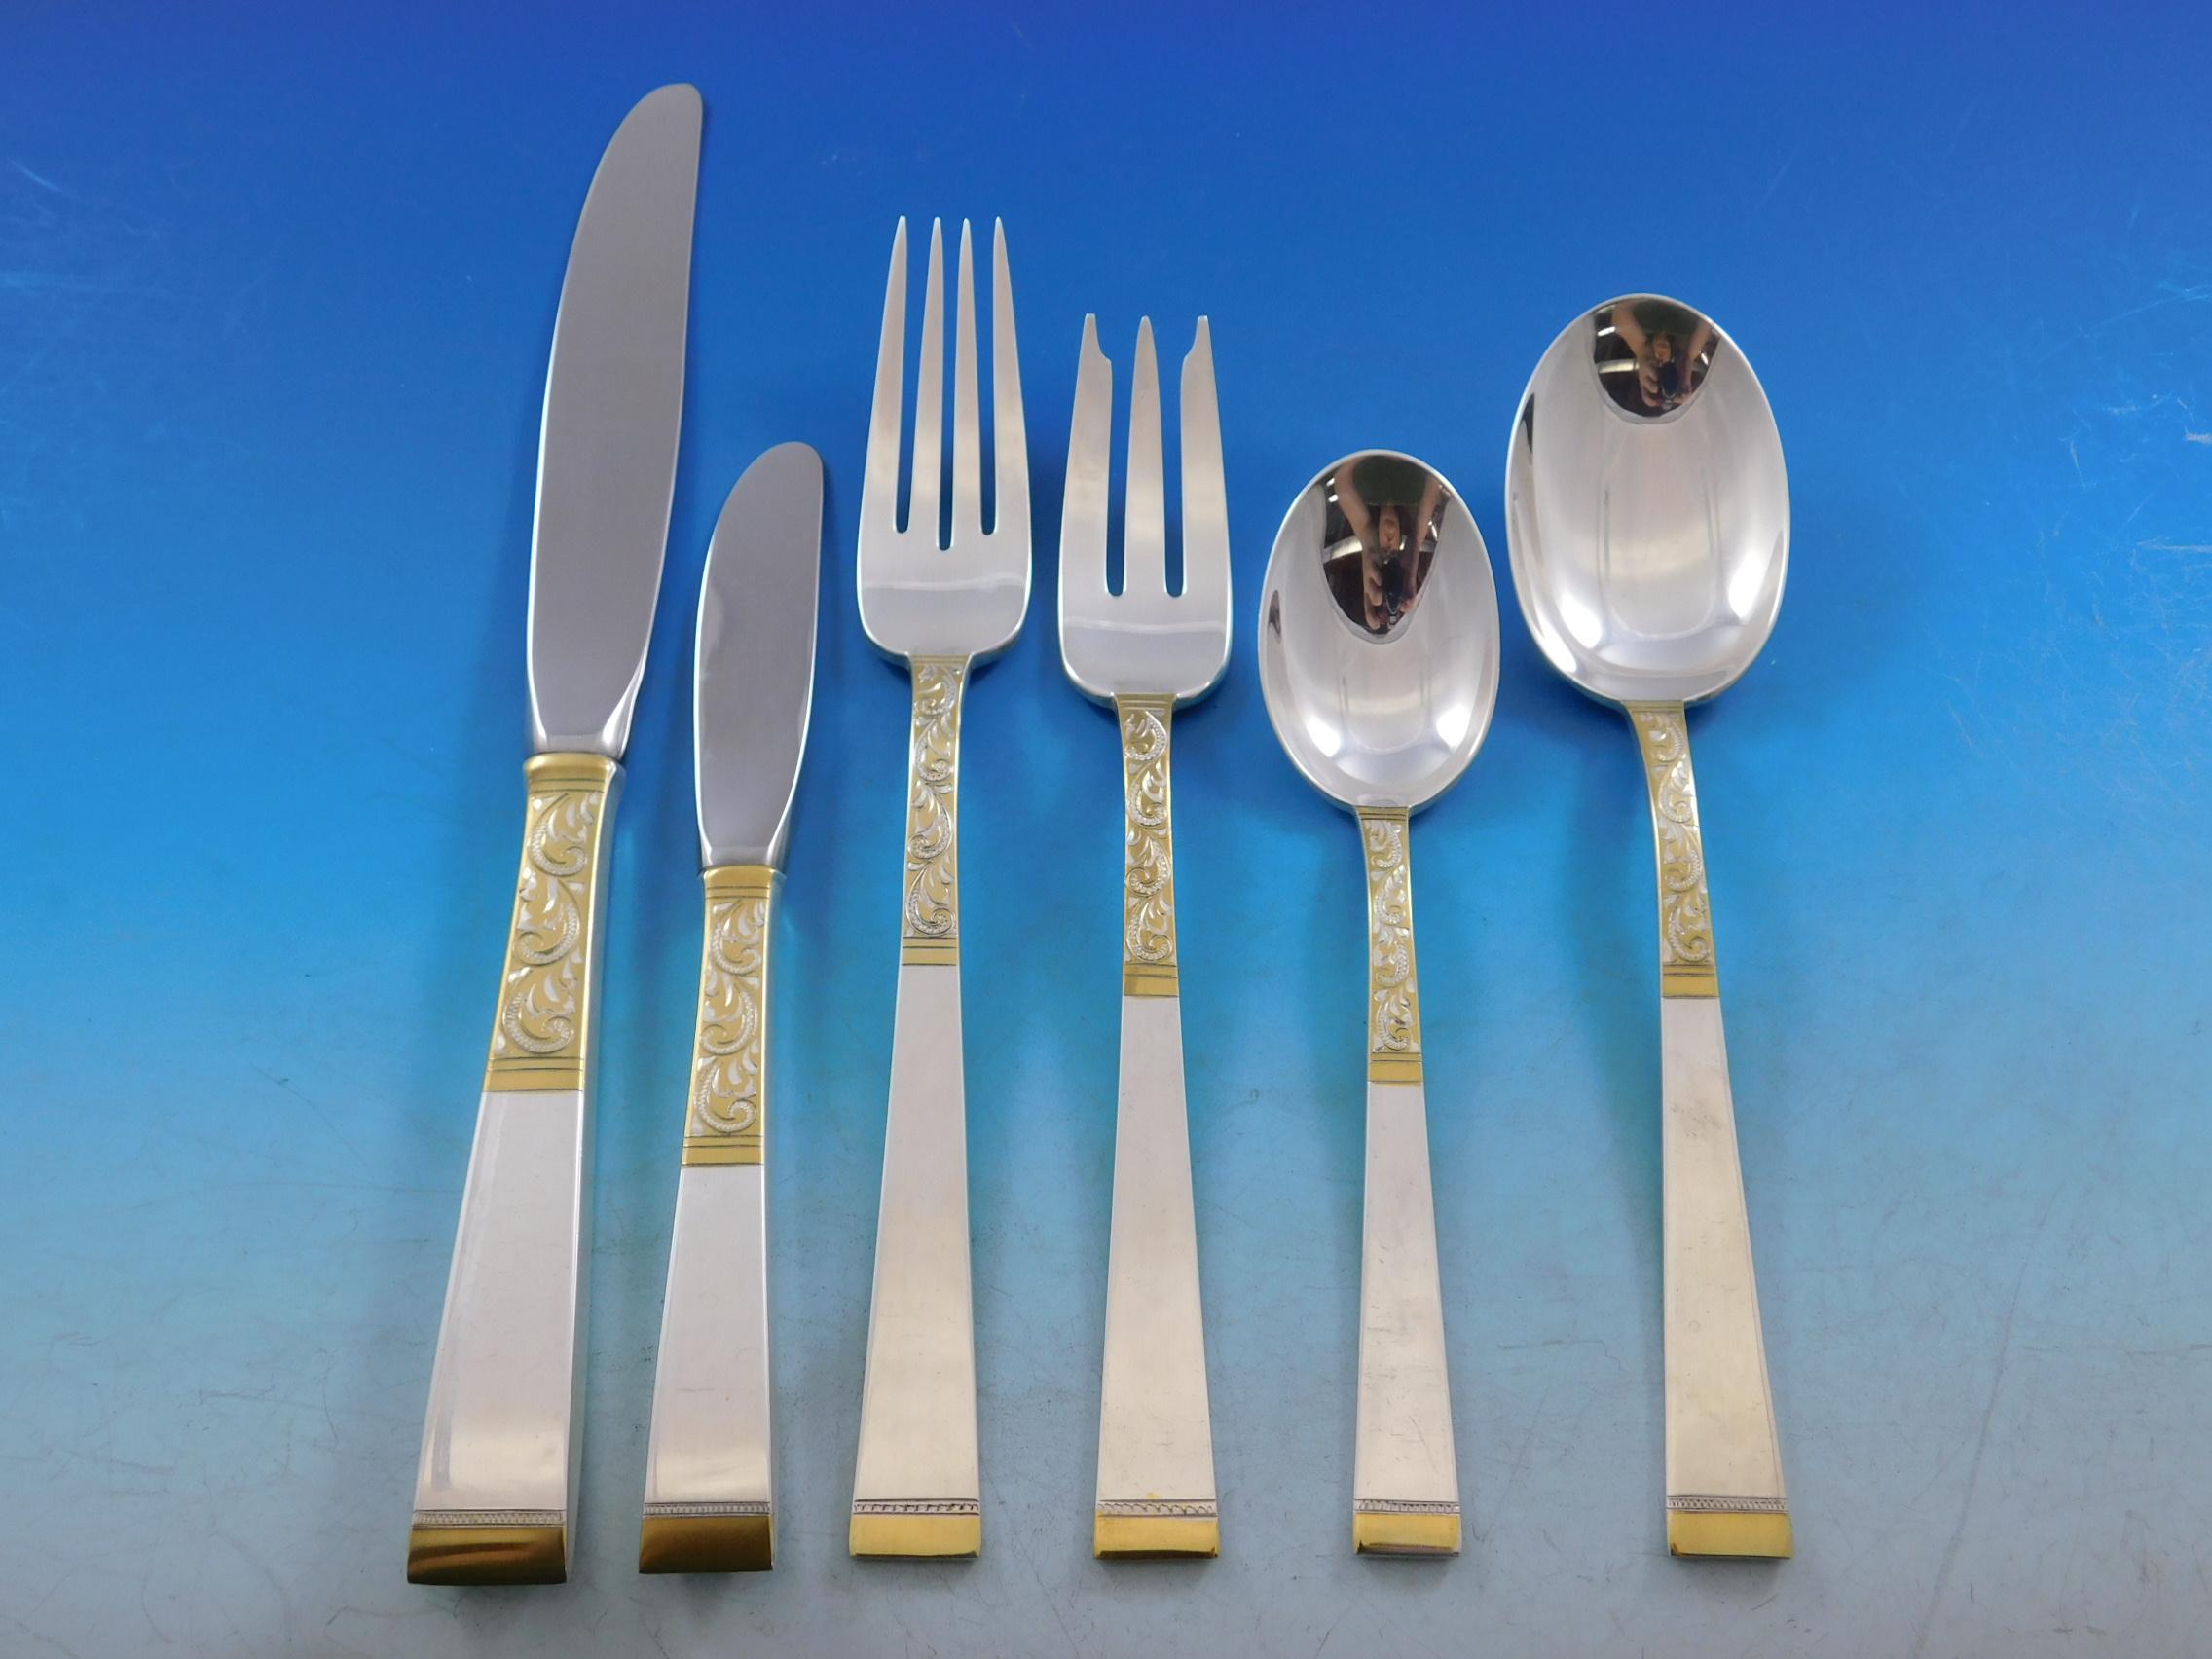 Golden scroll by Gorham sterling silver flatware set, 57 pieces. This set includes:

8 knives, 9 1/8